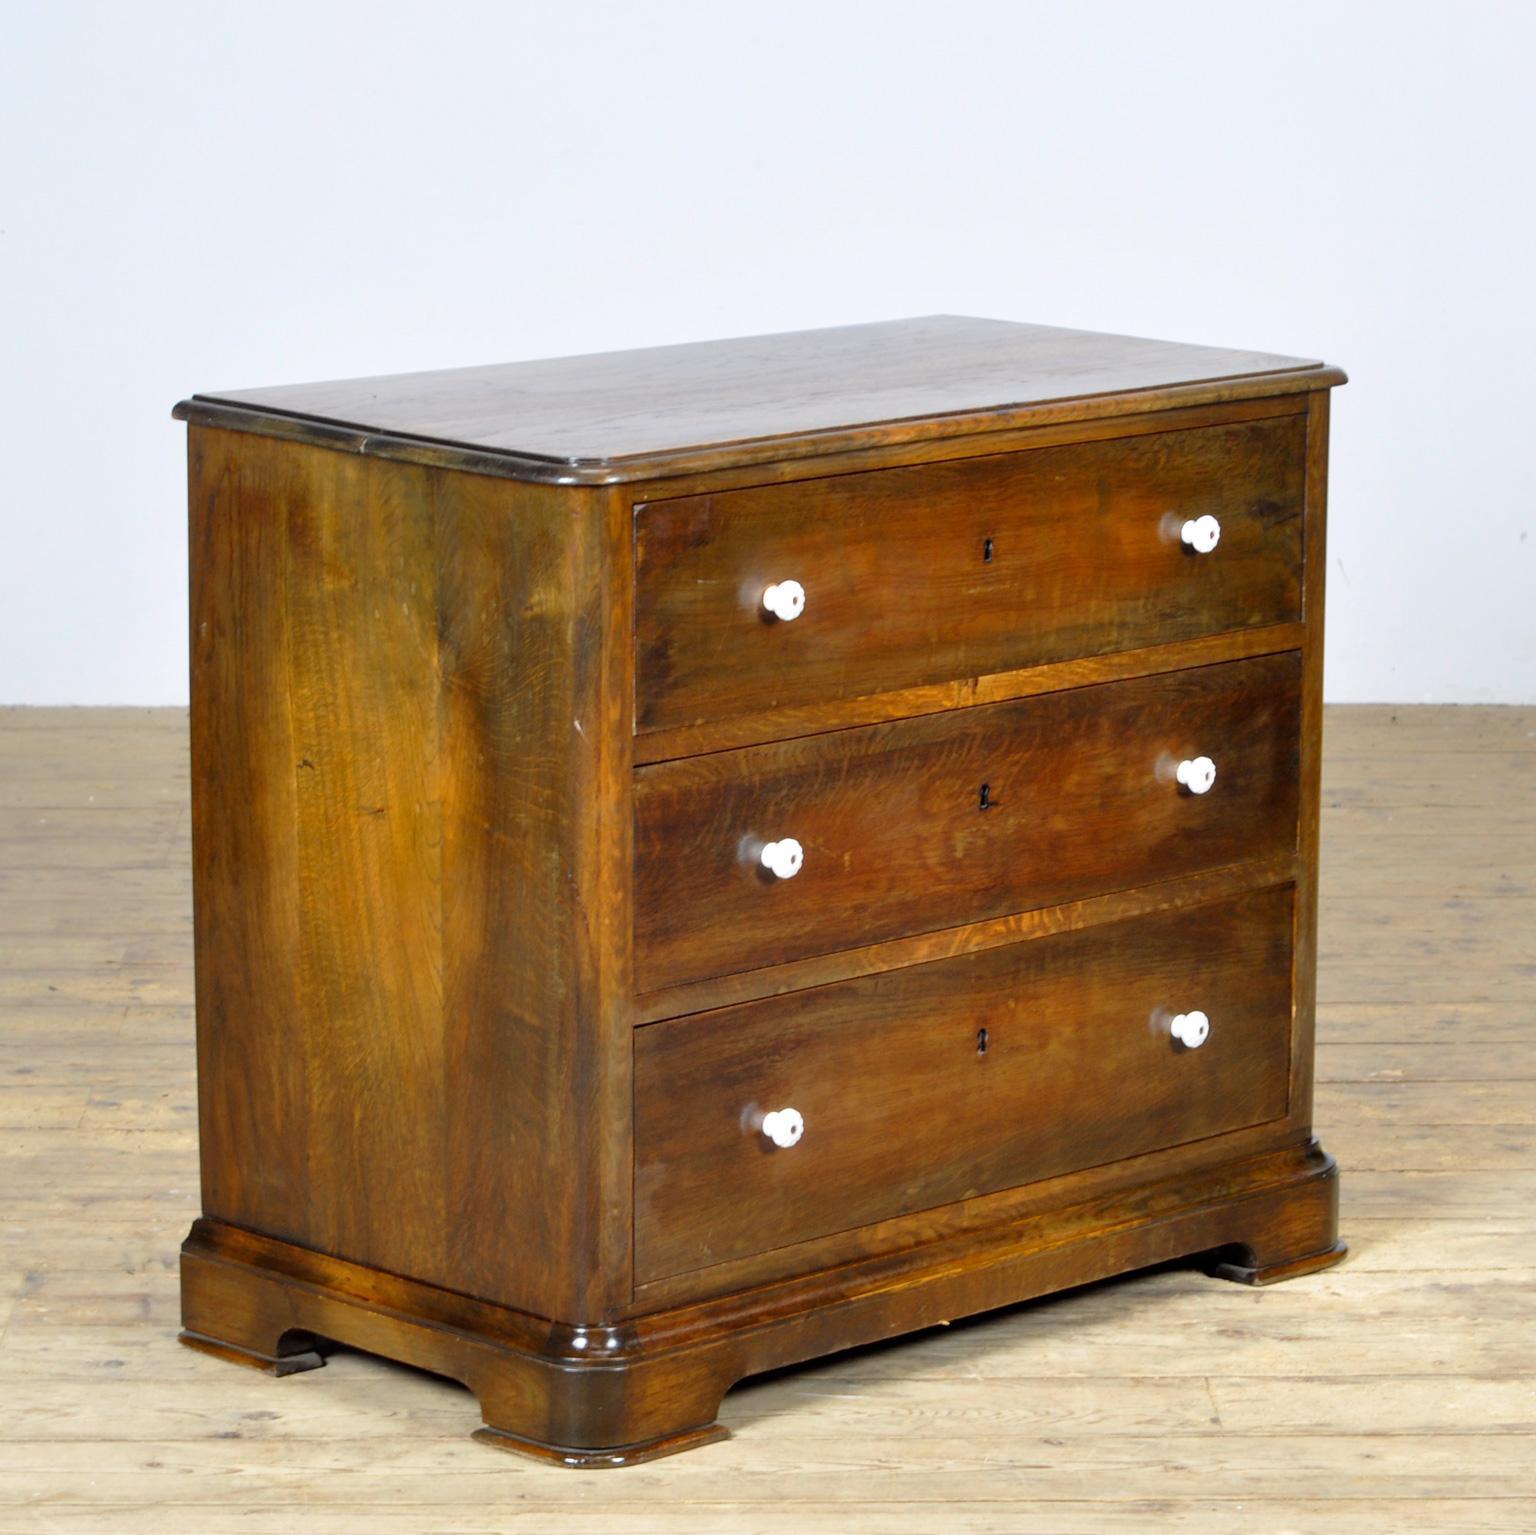 1920 chest of drawers